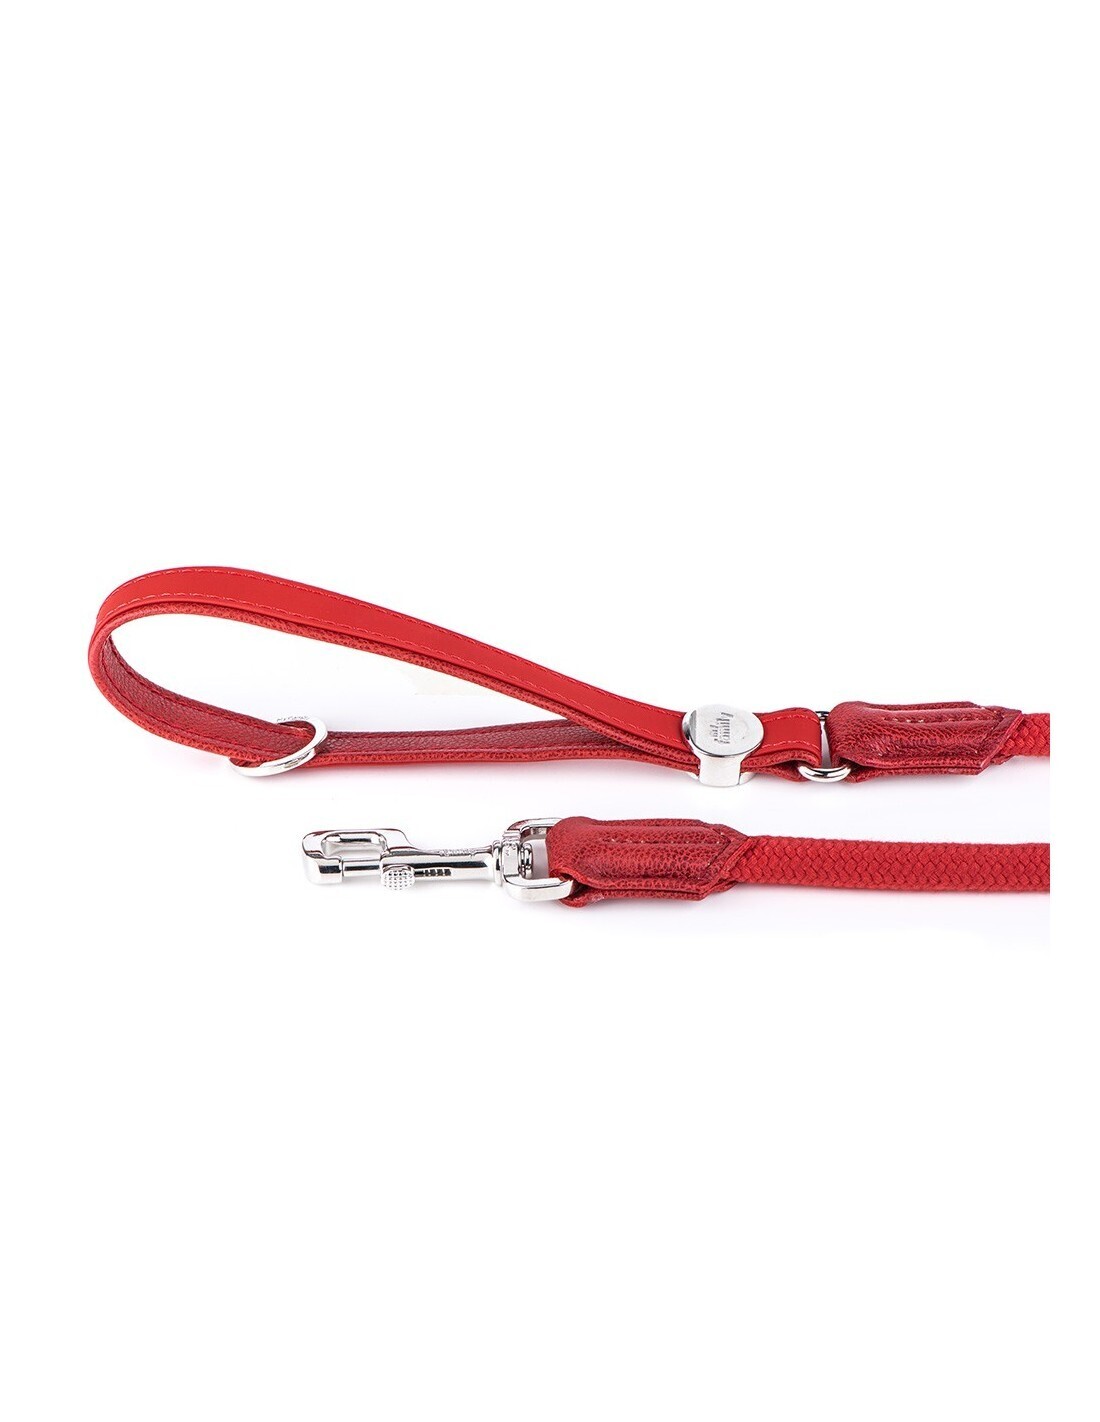 MyFamily Bilbao Dog Leash in Fine Crafted Red Leatherette and Rope